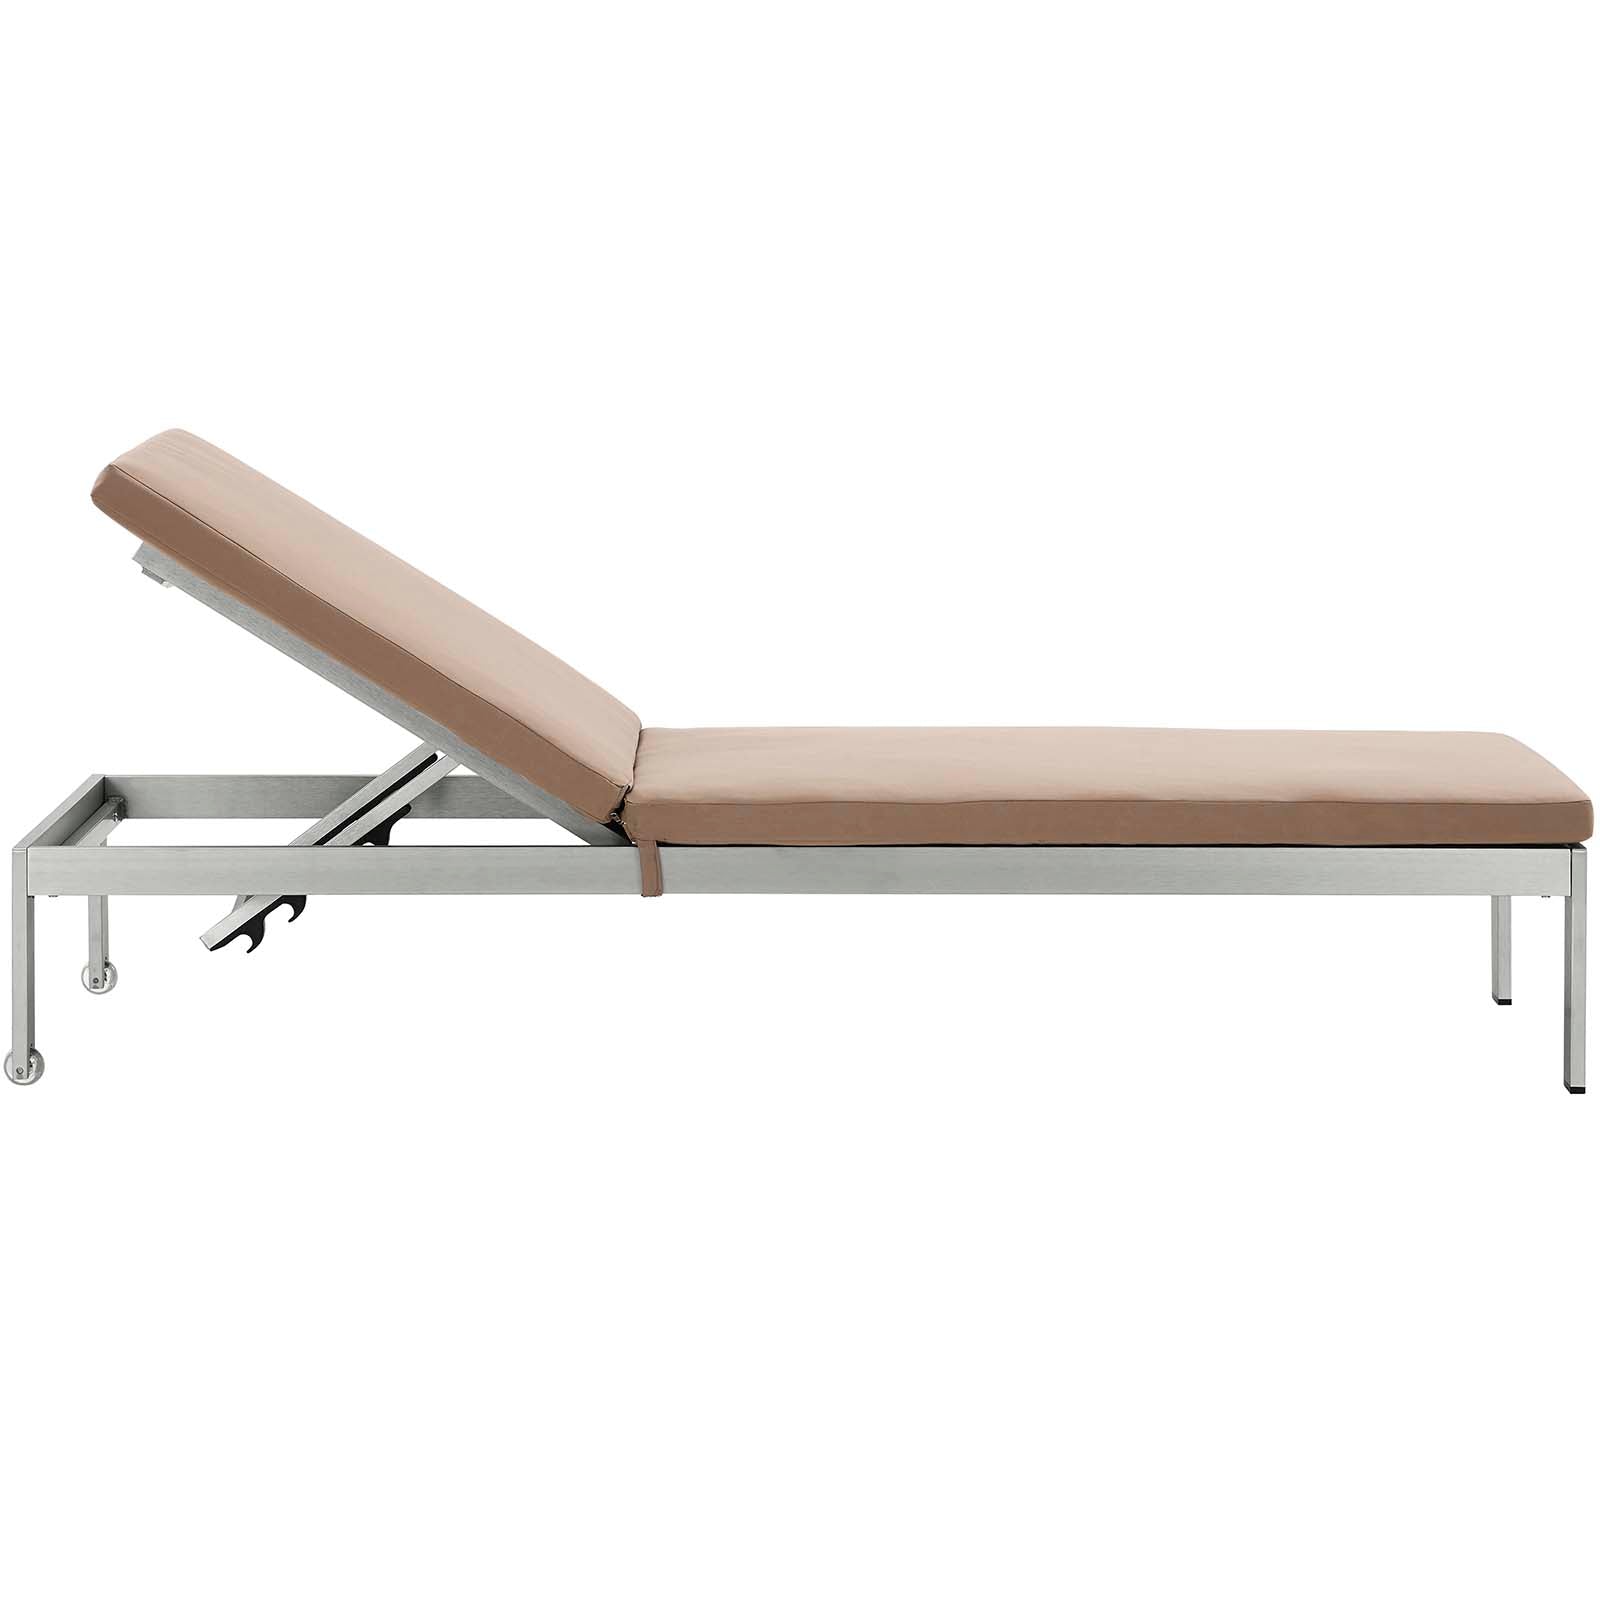 Modway - Shore Outdoor Patio Aluminum Chaise with Cushions - EEI-5547